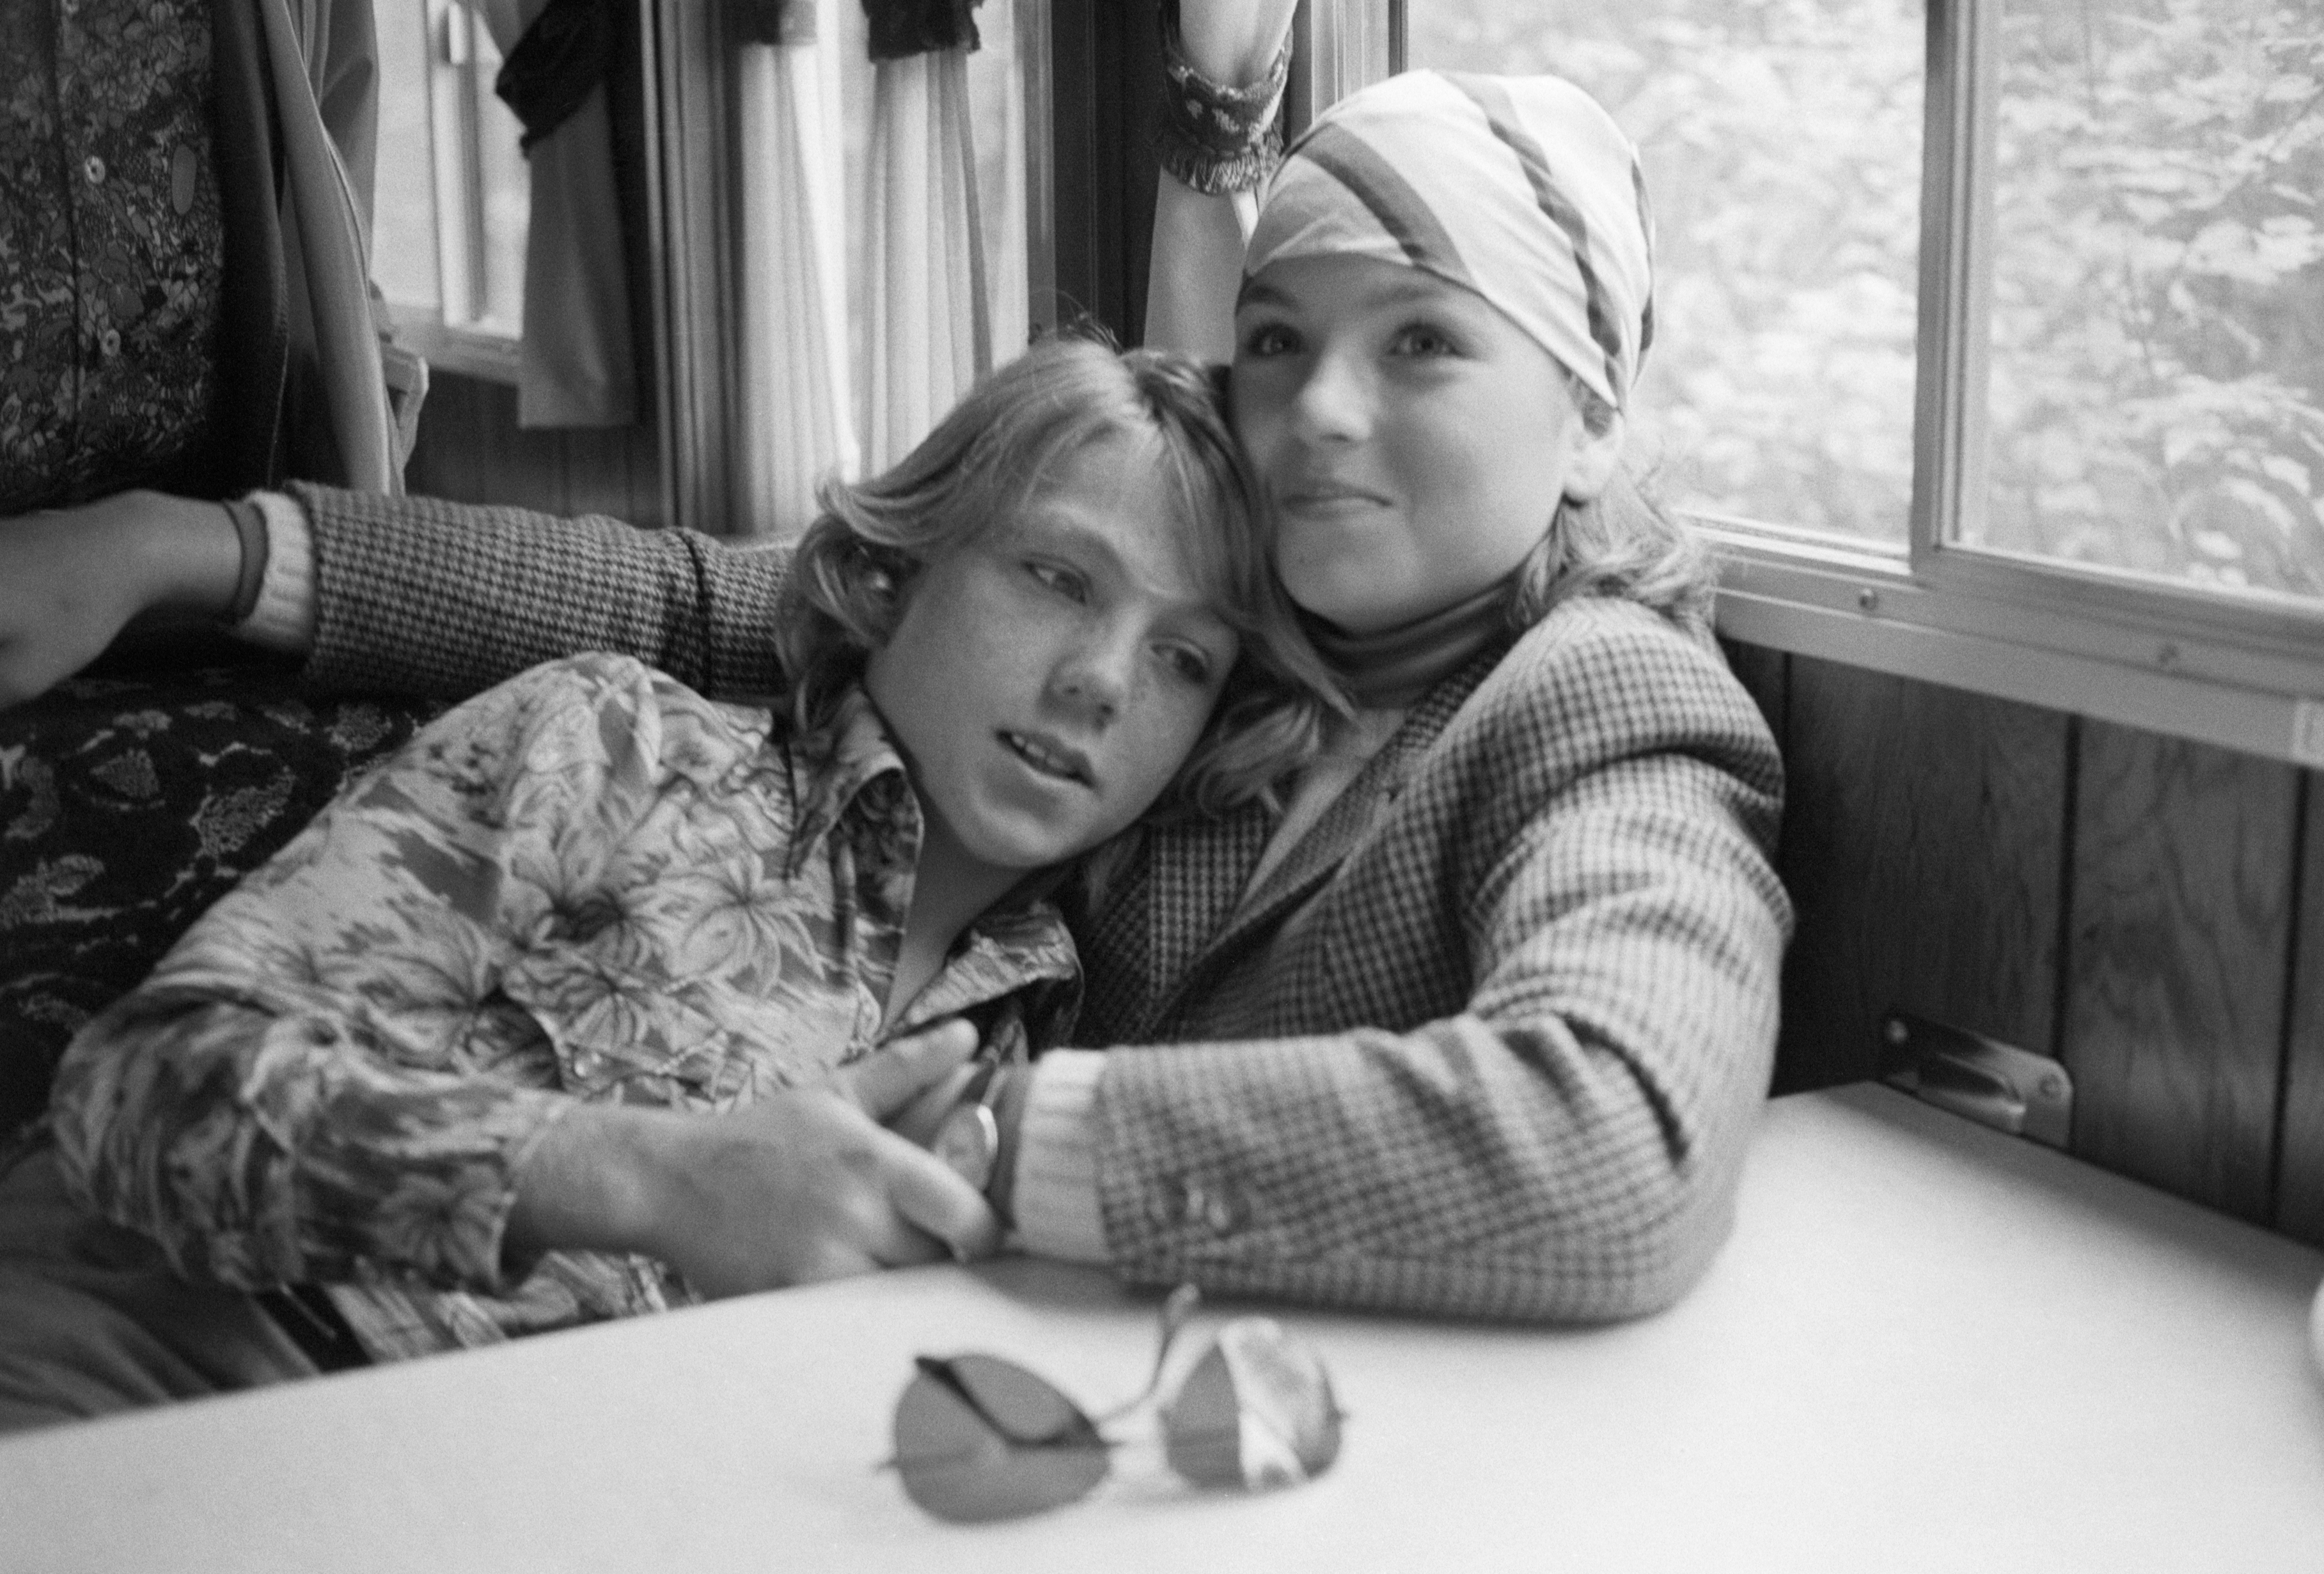 Griffin O'Neal, 12, leans on shoulder of sister Tatum O'Neal during visit to her mobile dressing room, circa 1977 | Source: Getty Images